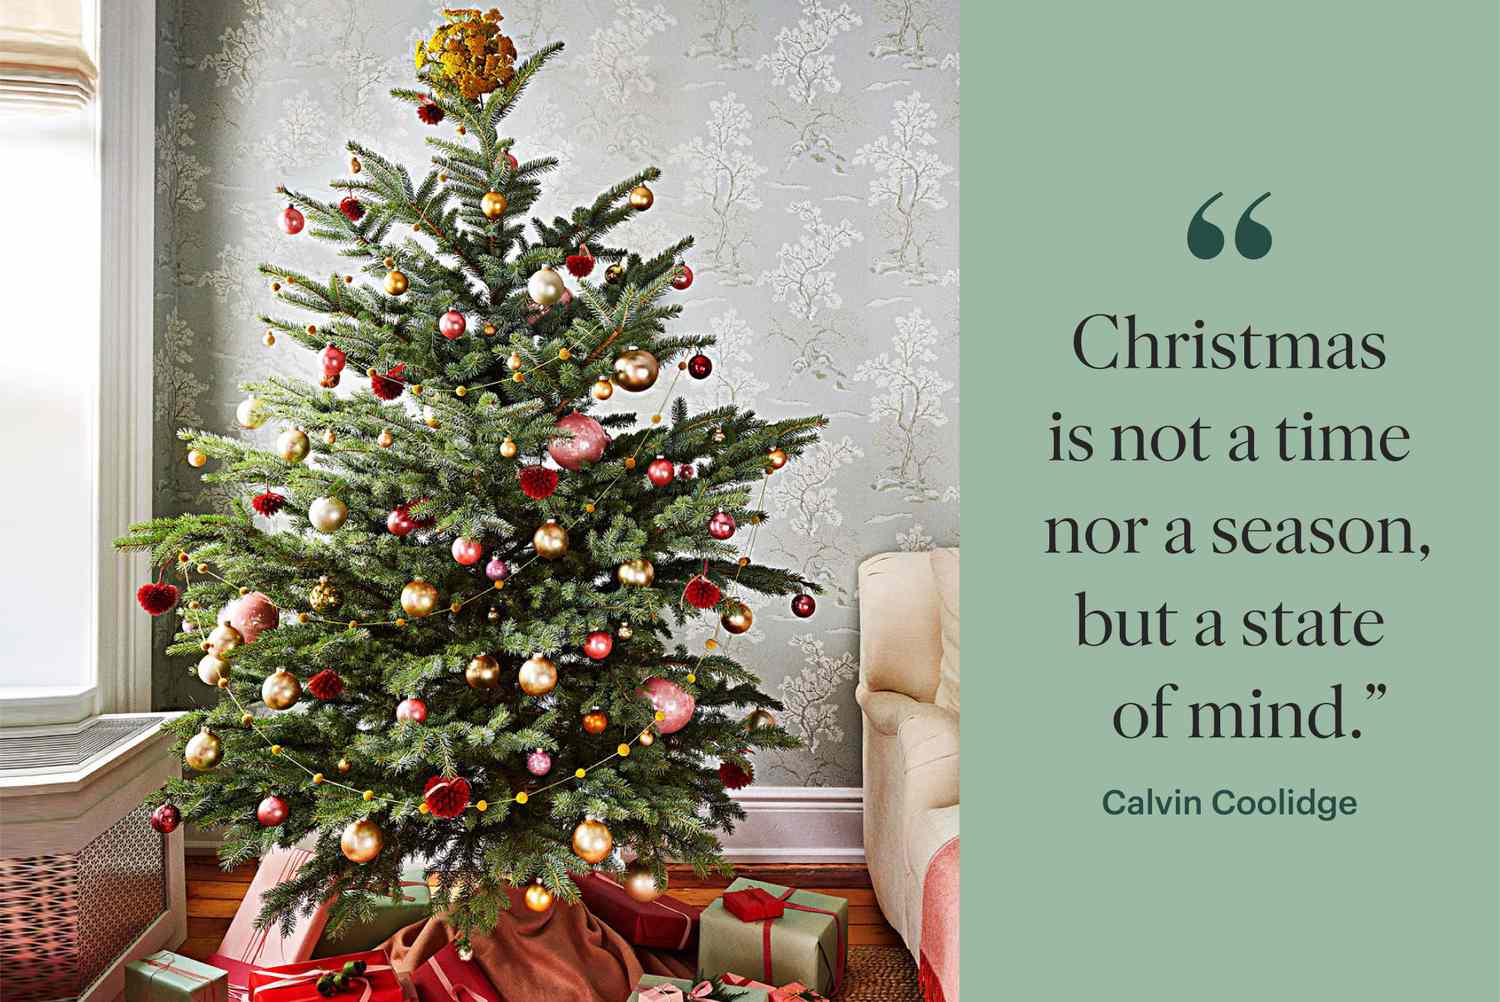 125+ Christmas Quotes to Wish Friends and Family a Holiday of Cheer